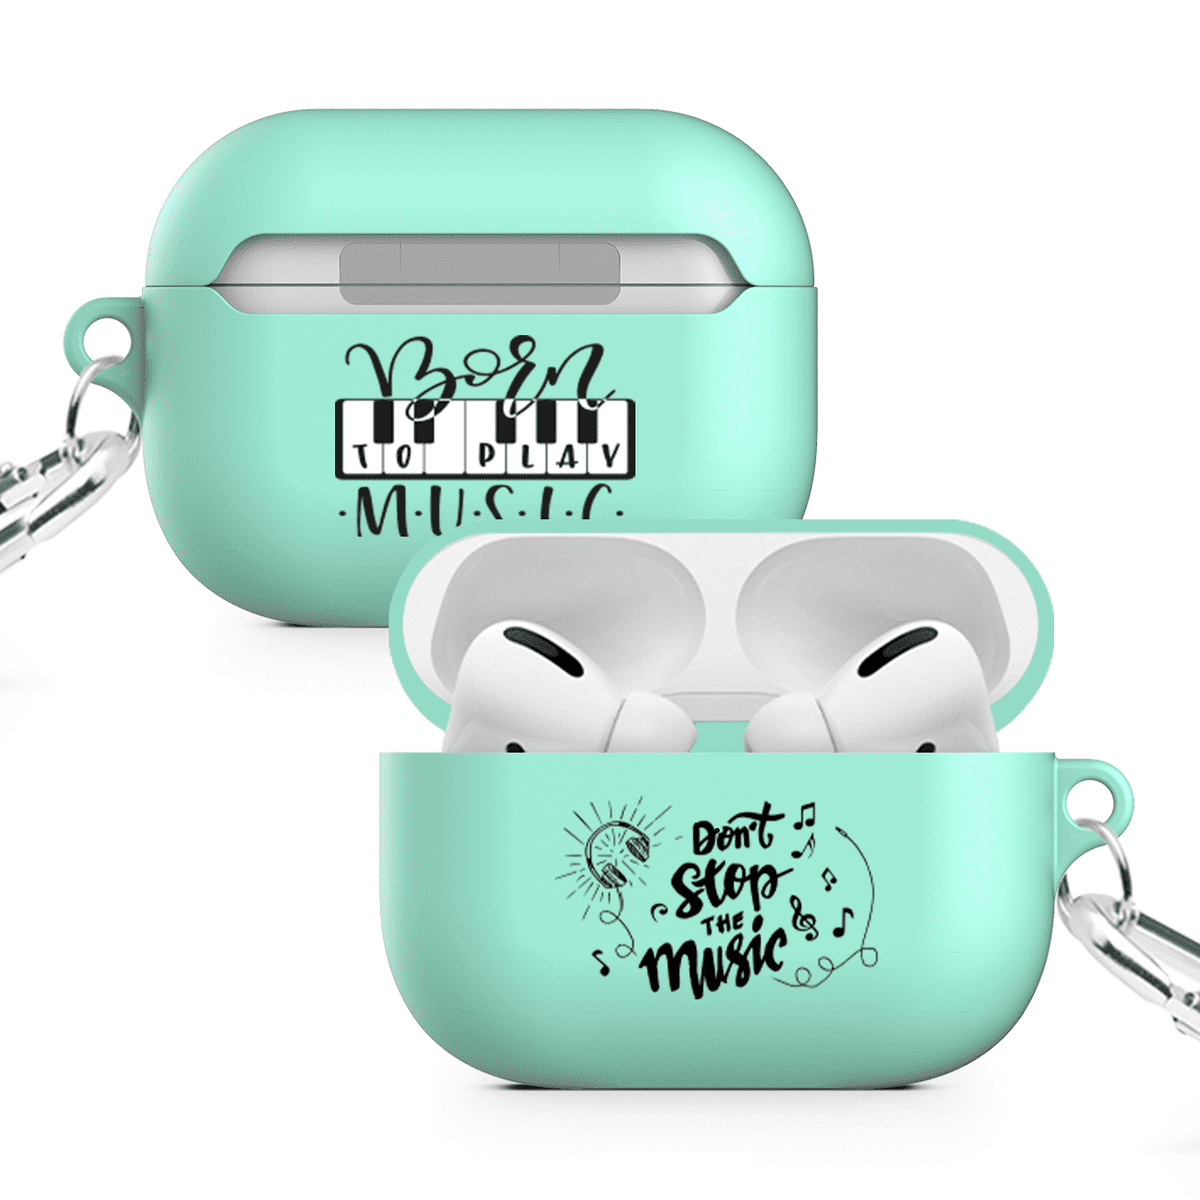 Customer Favorites: Most Popular Personalized AirPods Case Designs of the Month